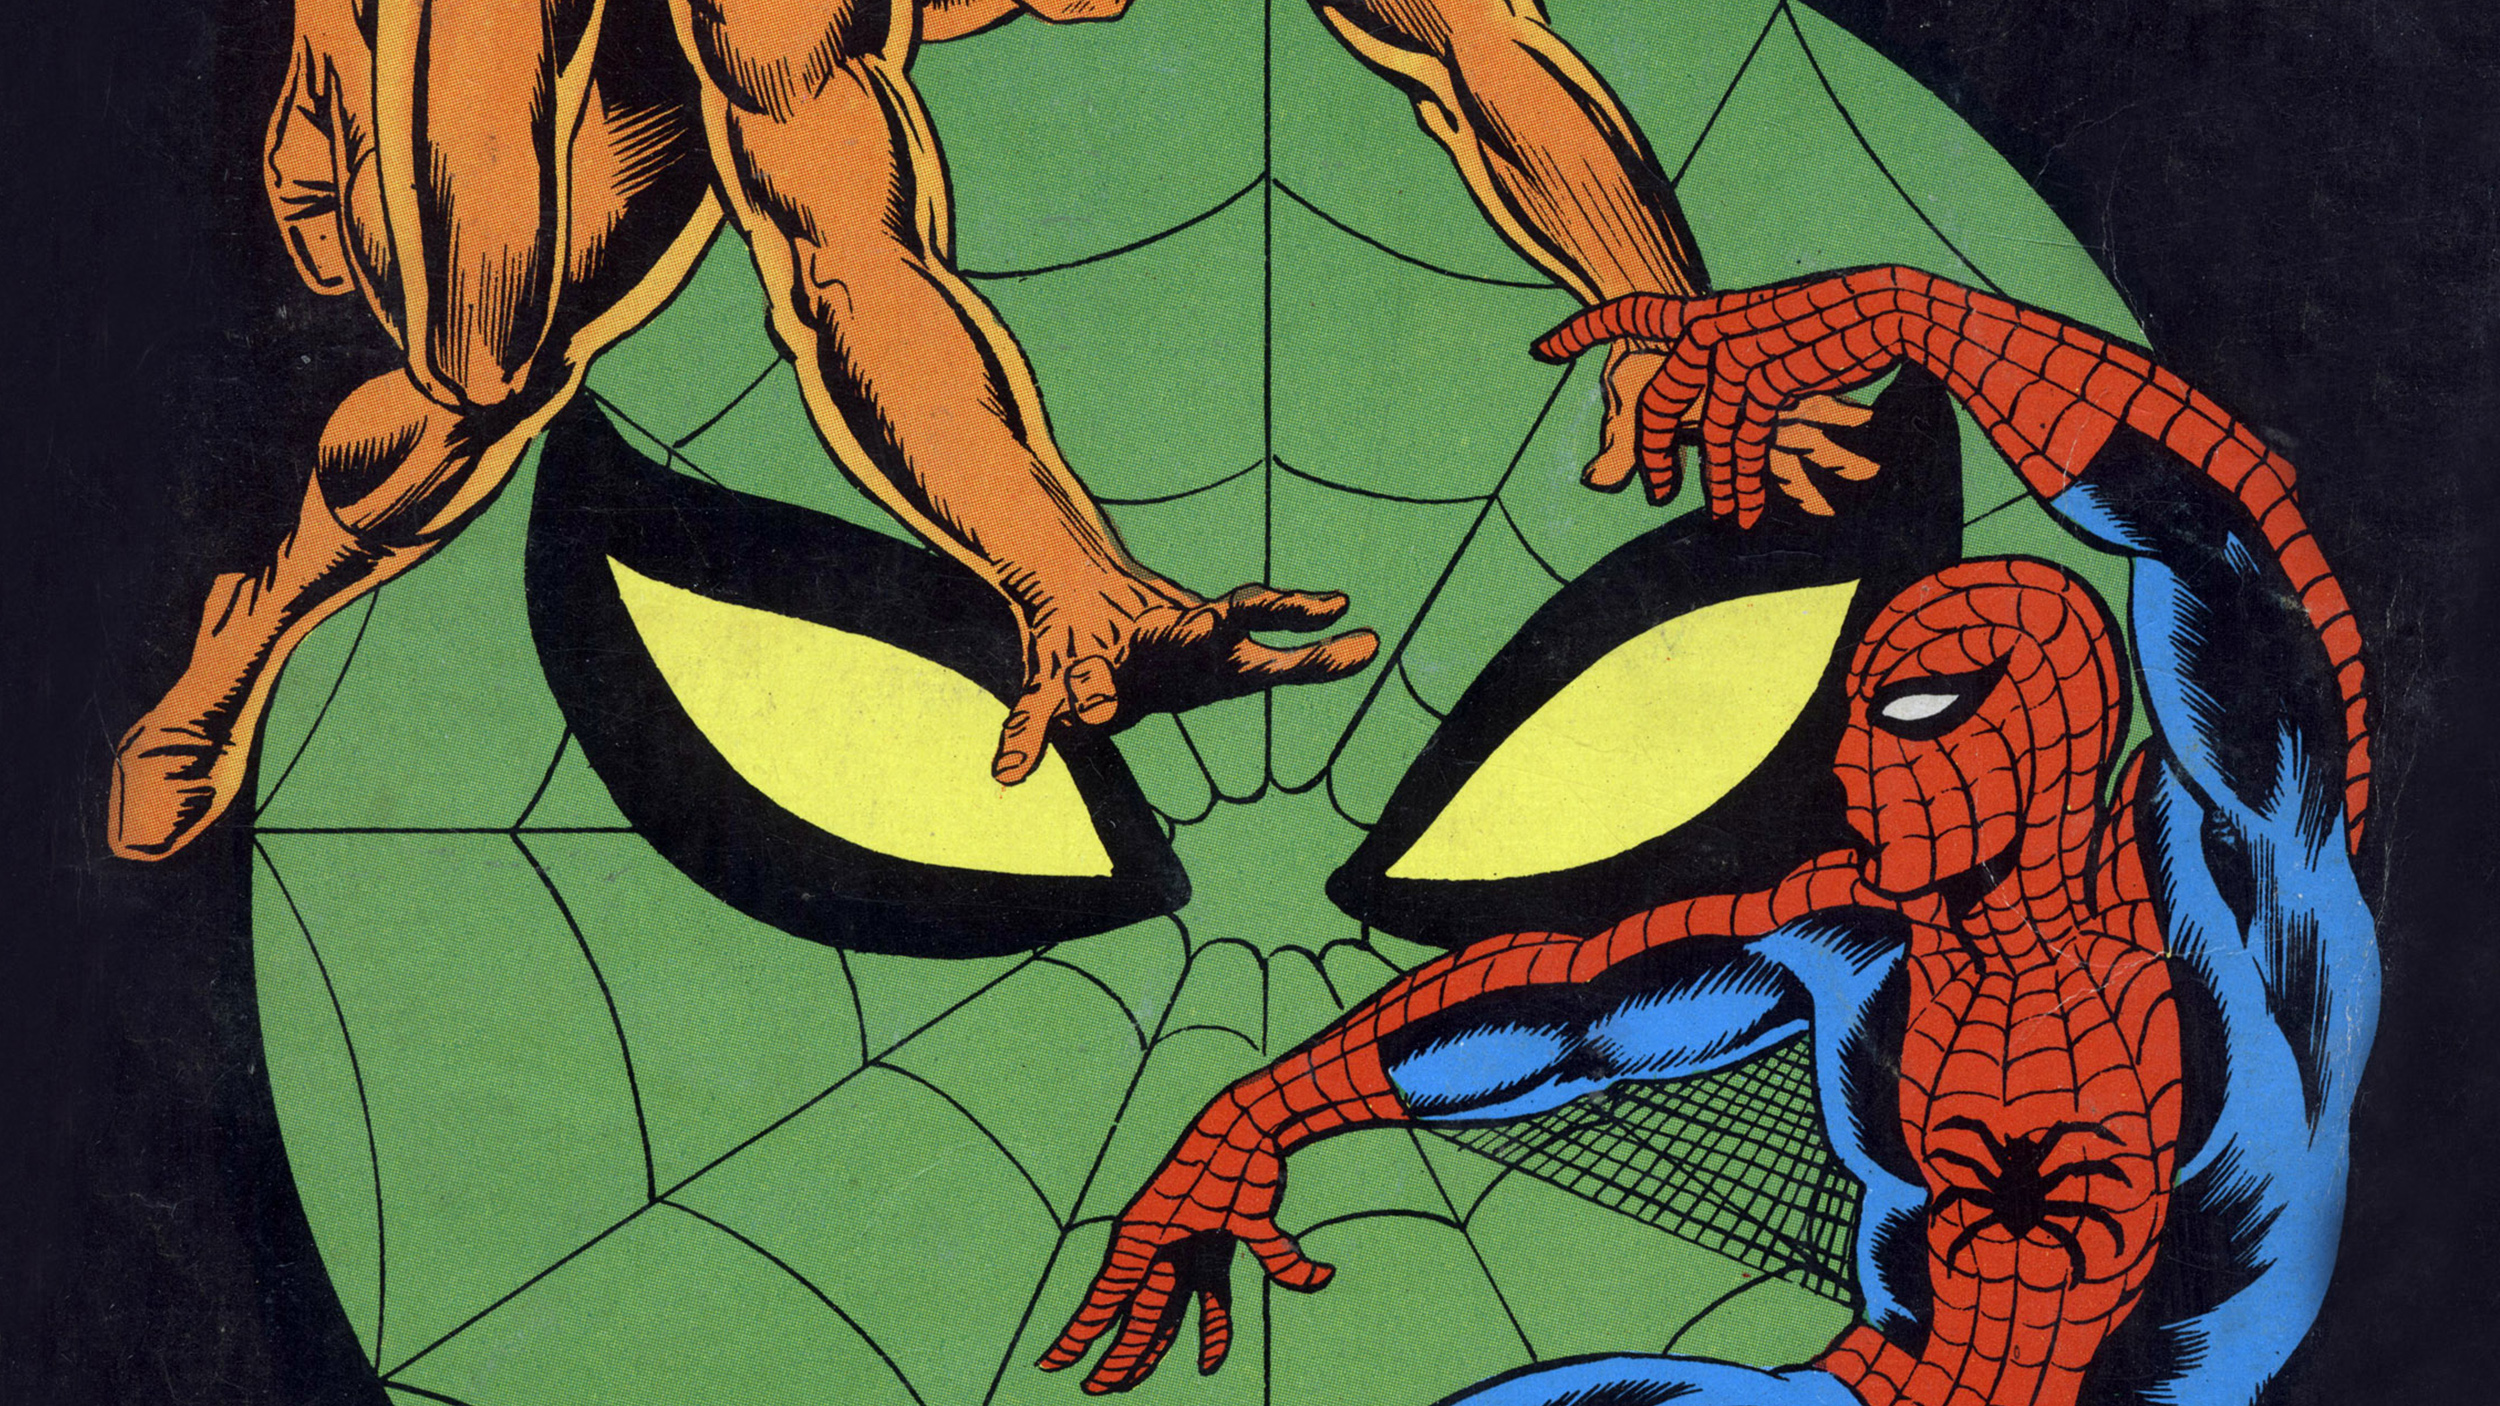 A Marvel Comics' comic book cover featuring Spider-Man and a spider.